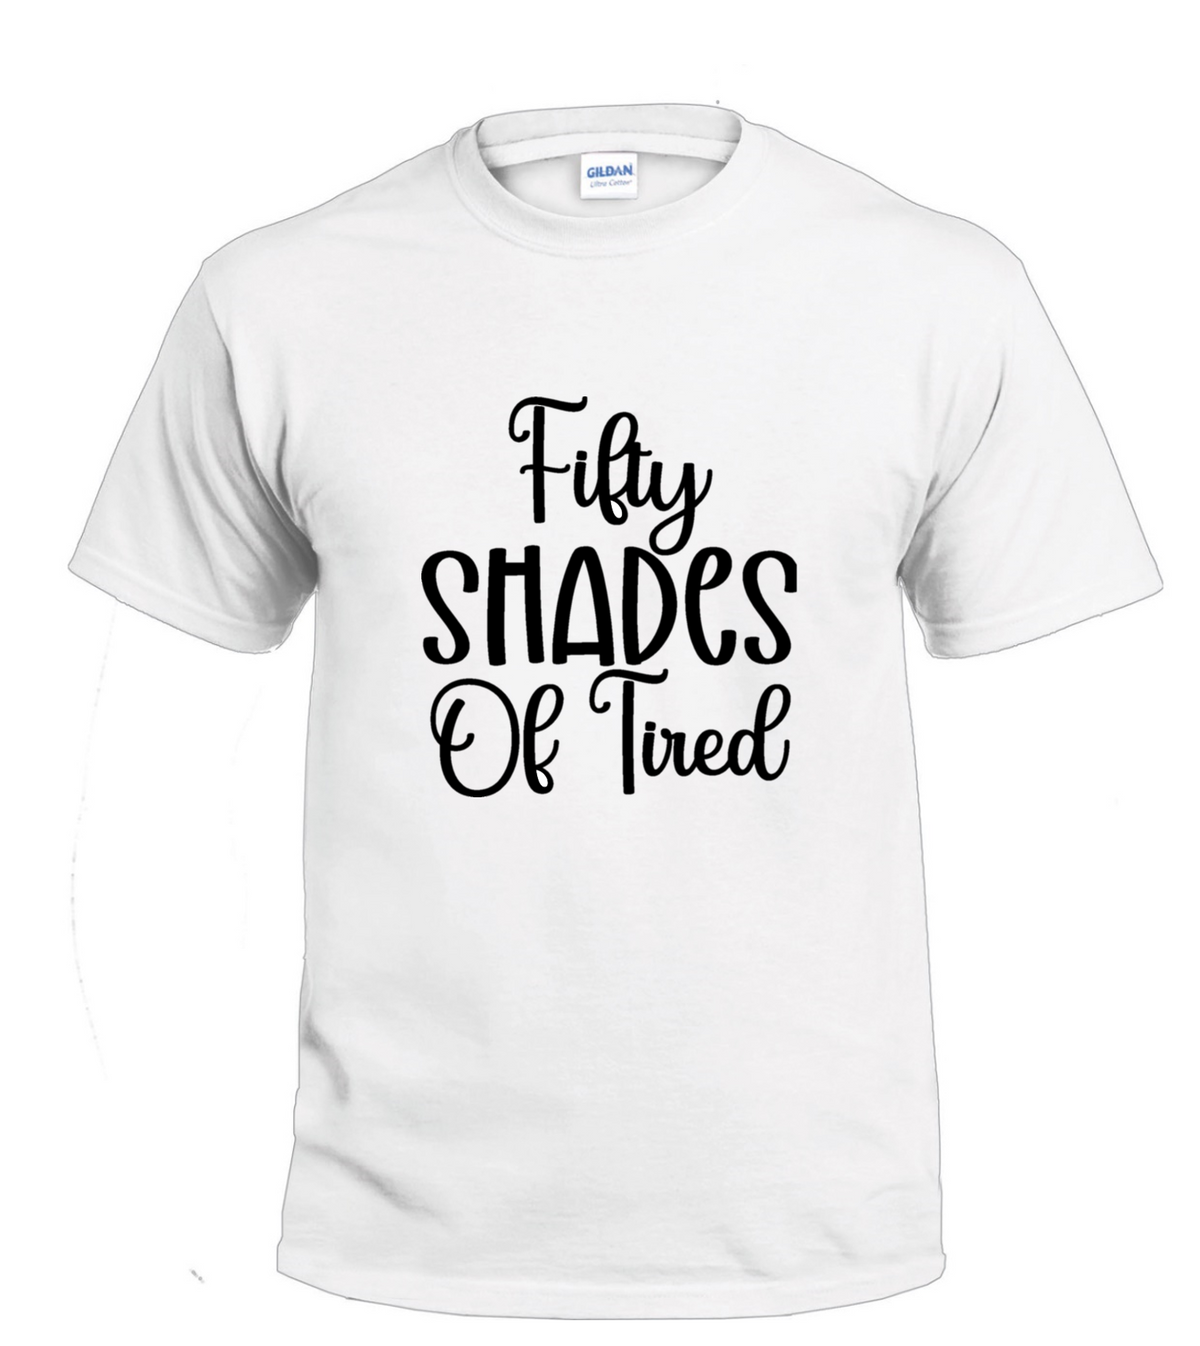 Fifty Shades of Tired t-shirt